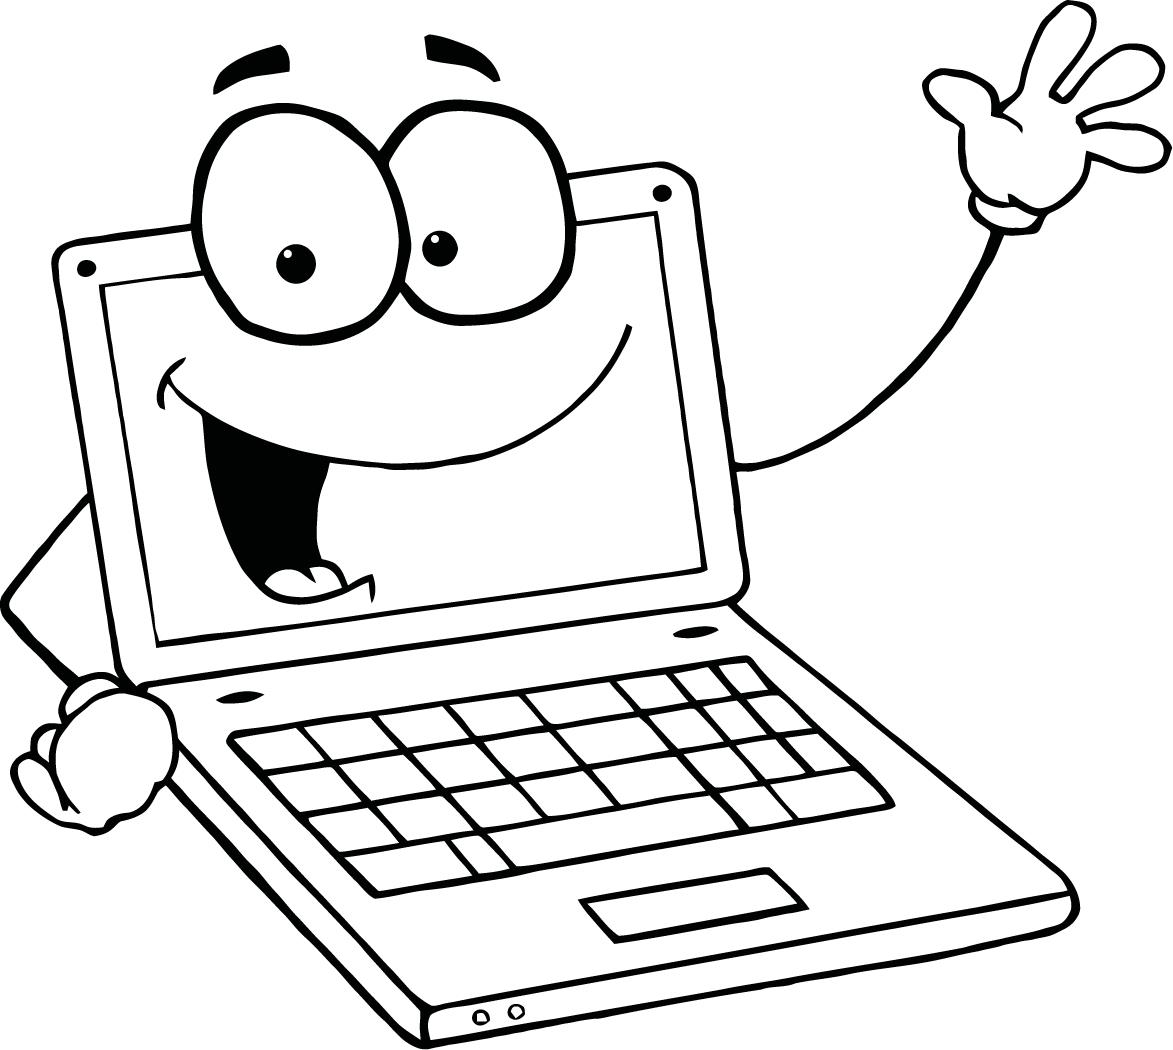 coloring page of a laptop cartoon character for kids - Coloring ...